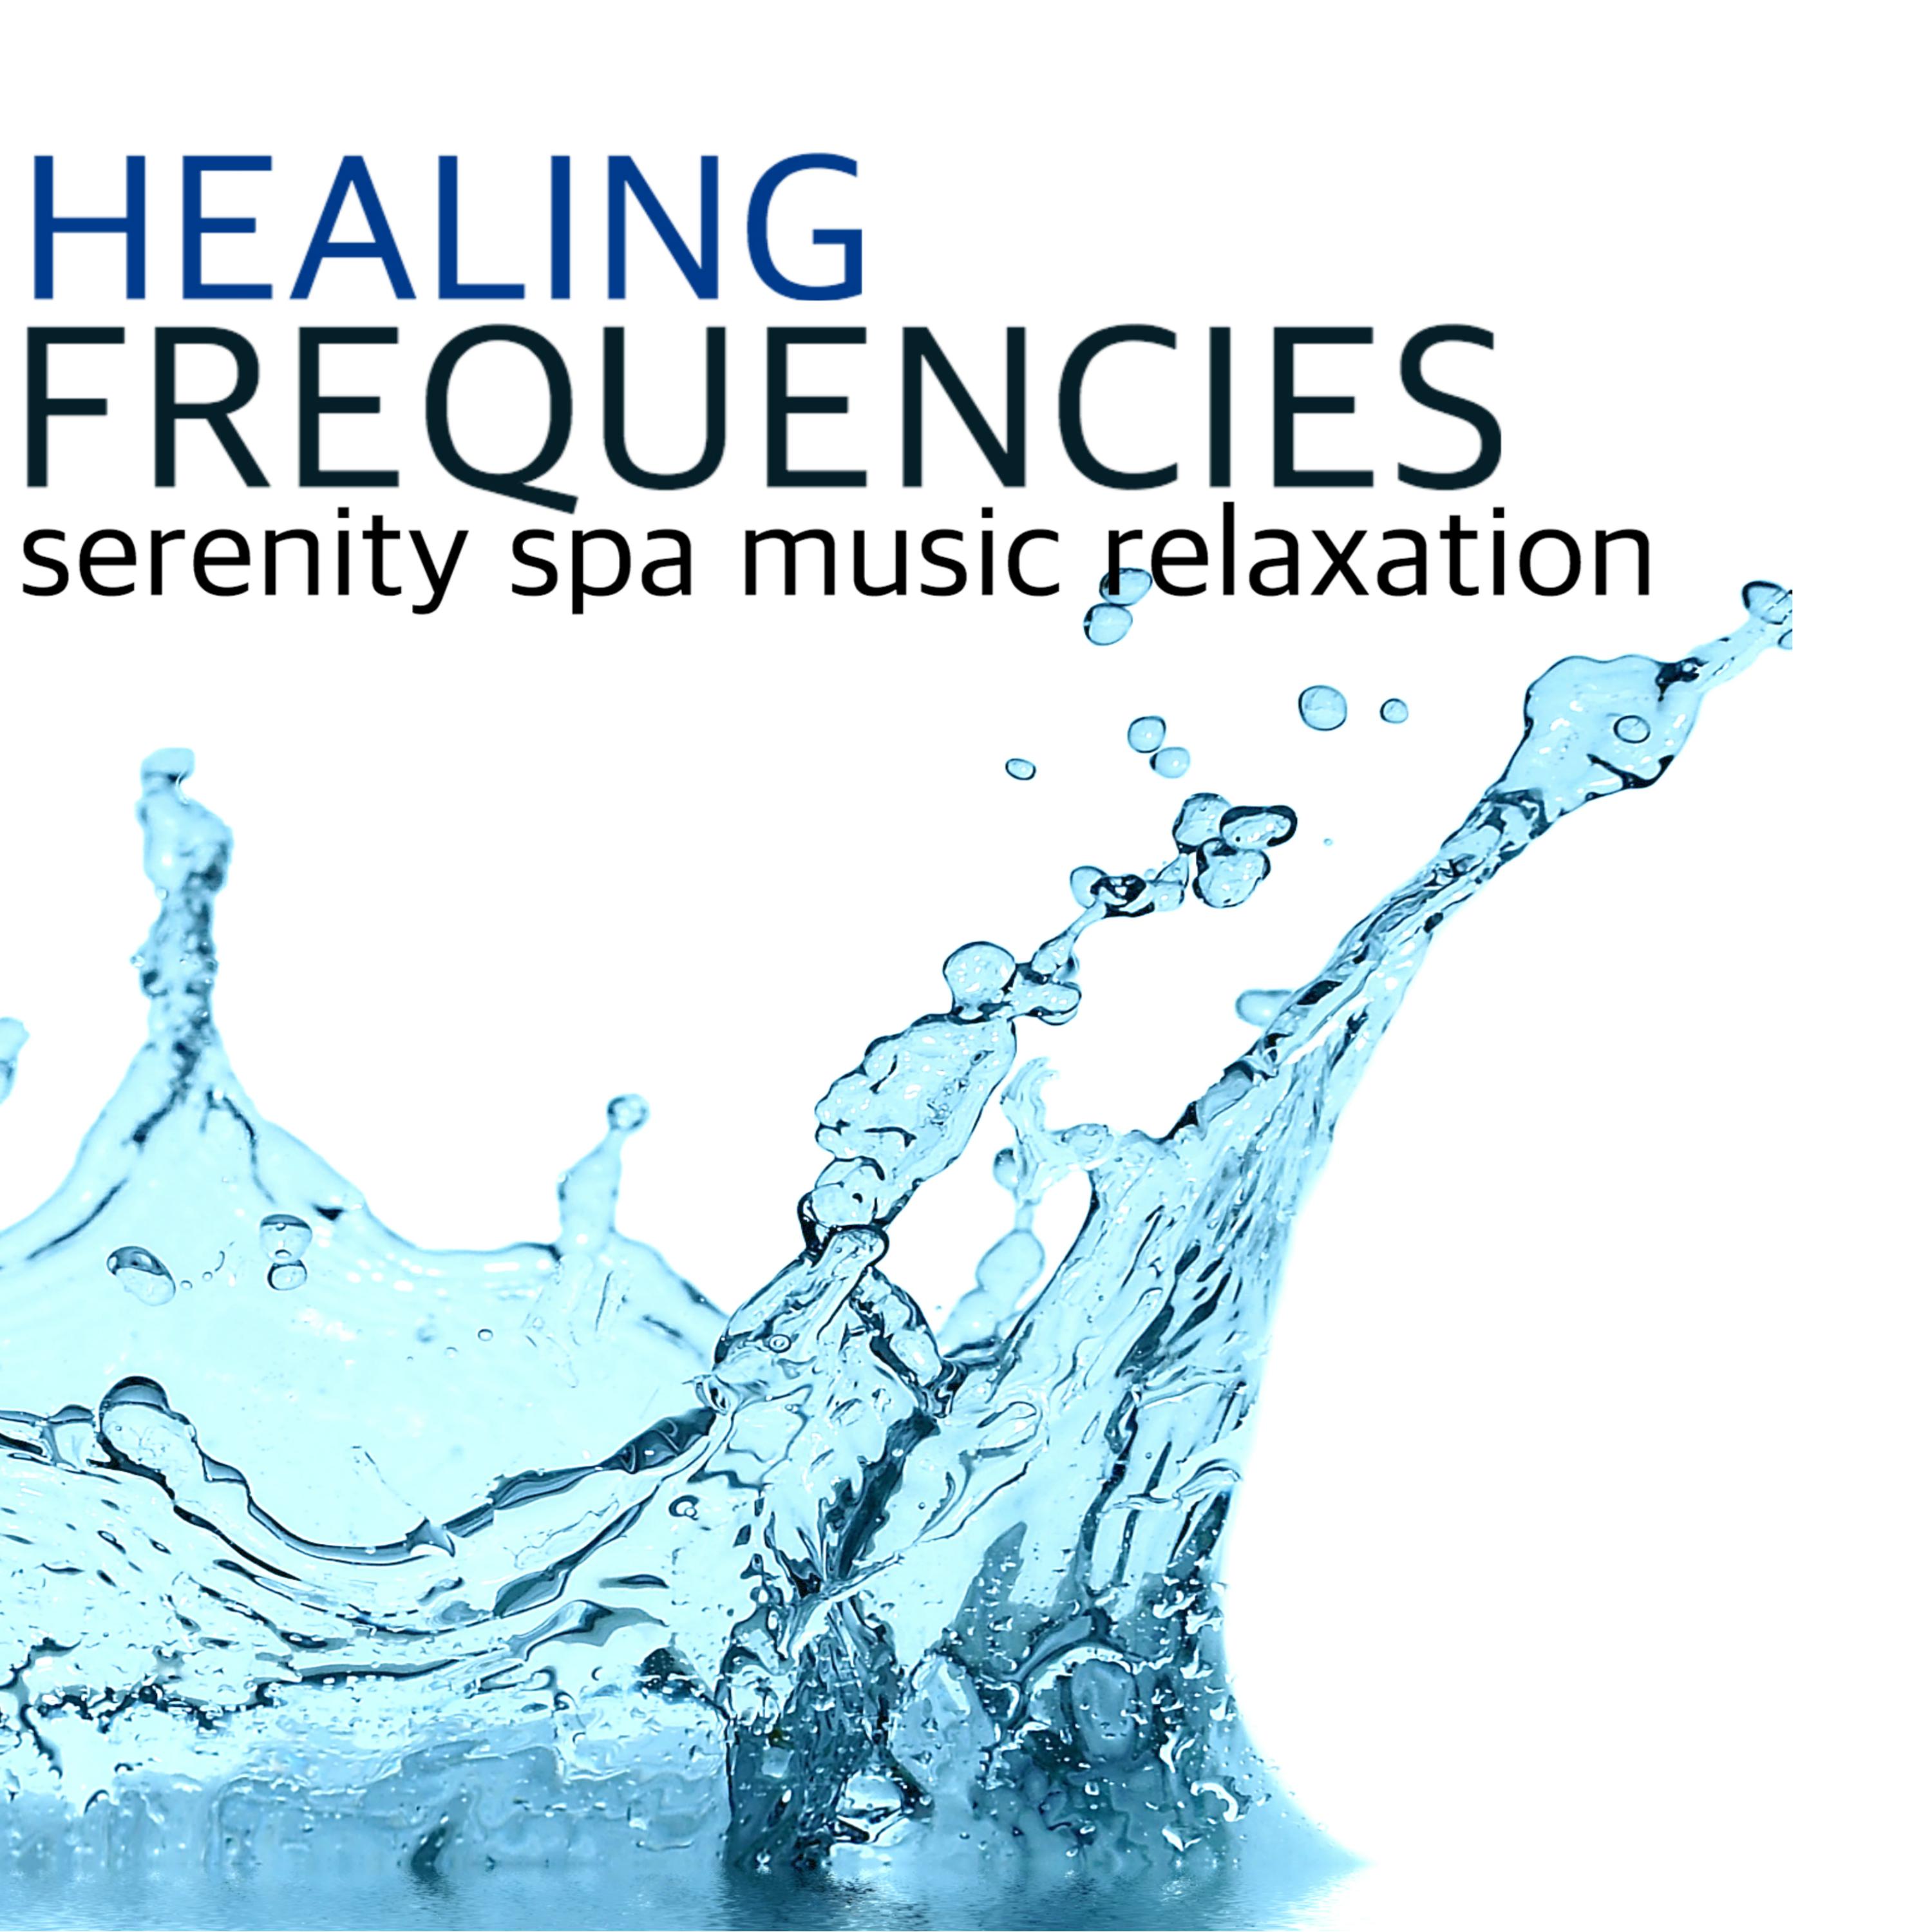 Healing Frequencies - Sleep Disorder Calming Music, Serenity Spa Music Relaxation